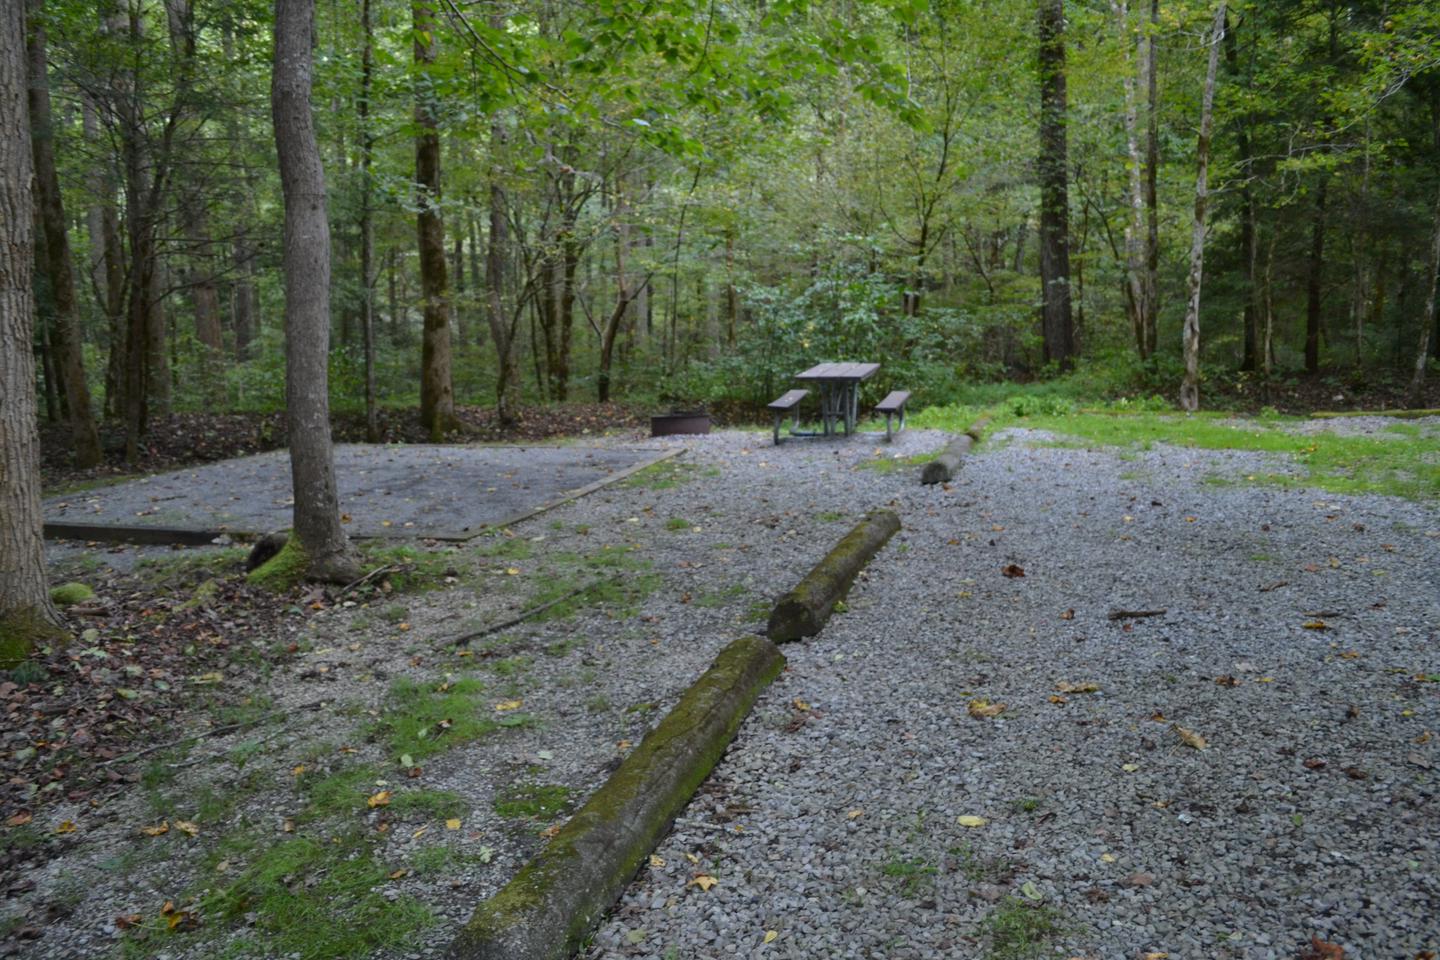 Big Creek Horse Camp Site 4View of site from road showing location of picnic table and tent pad relative to the parking pad